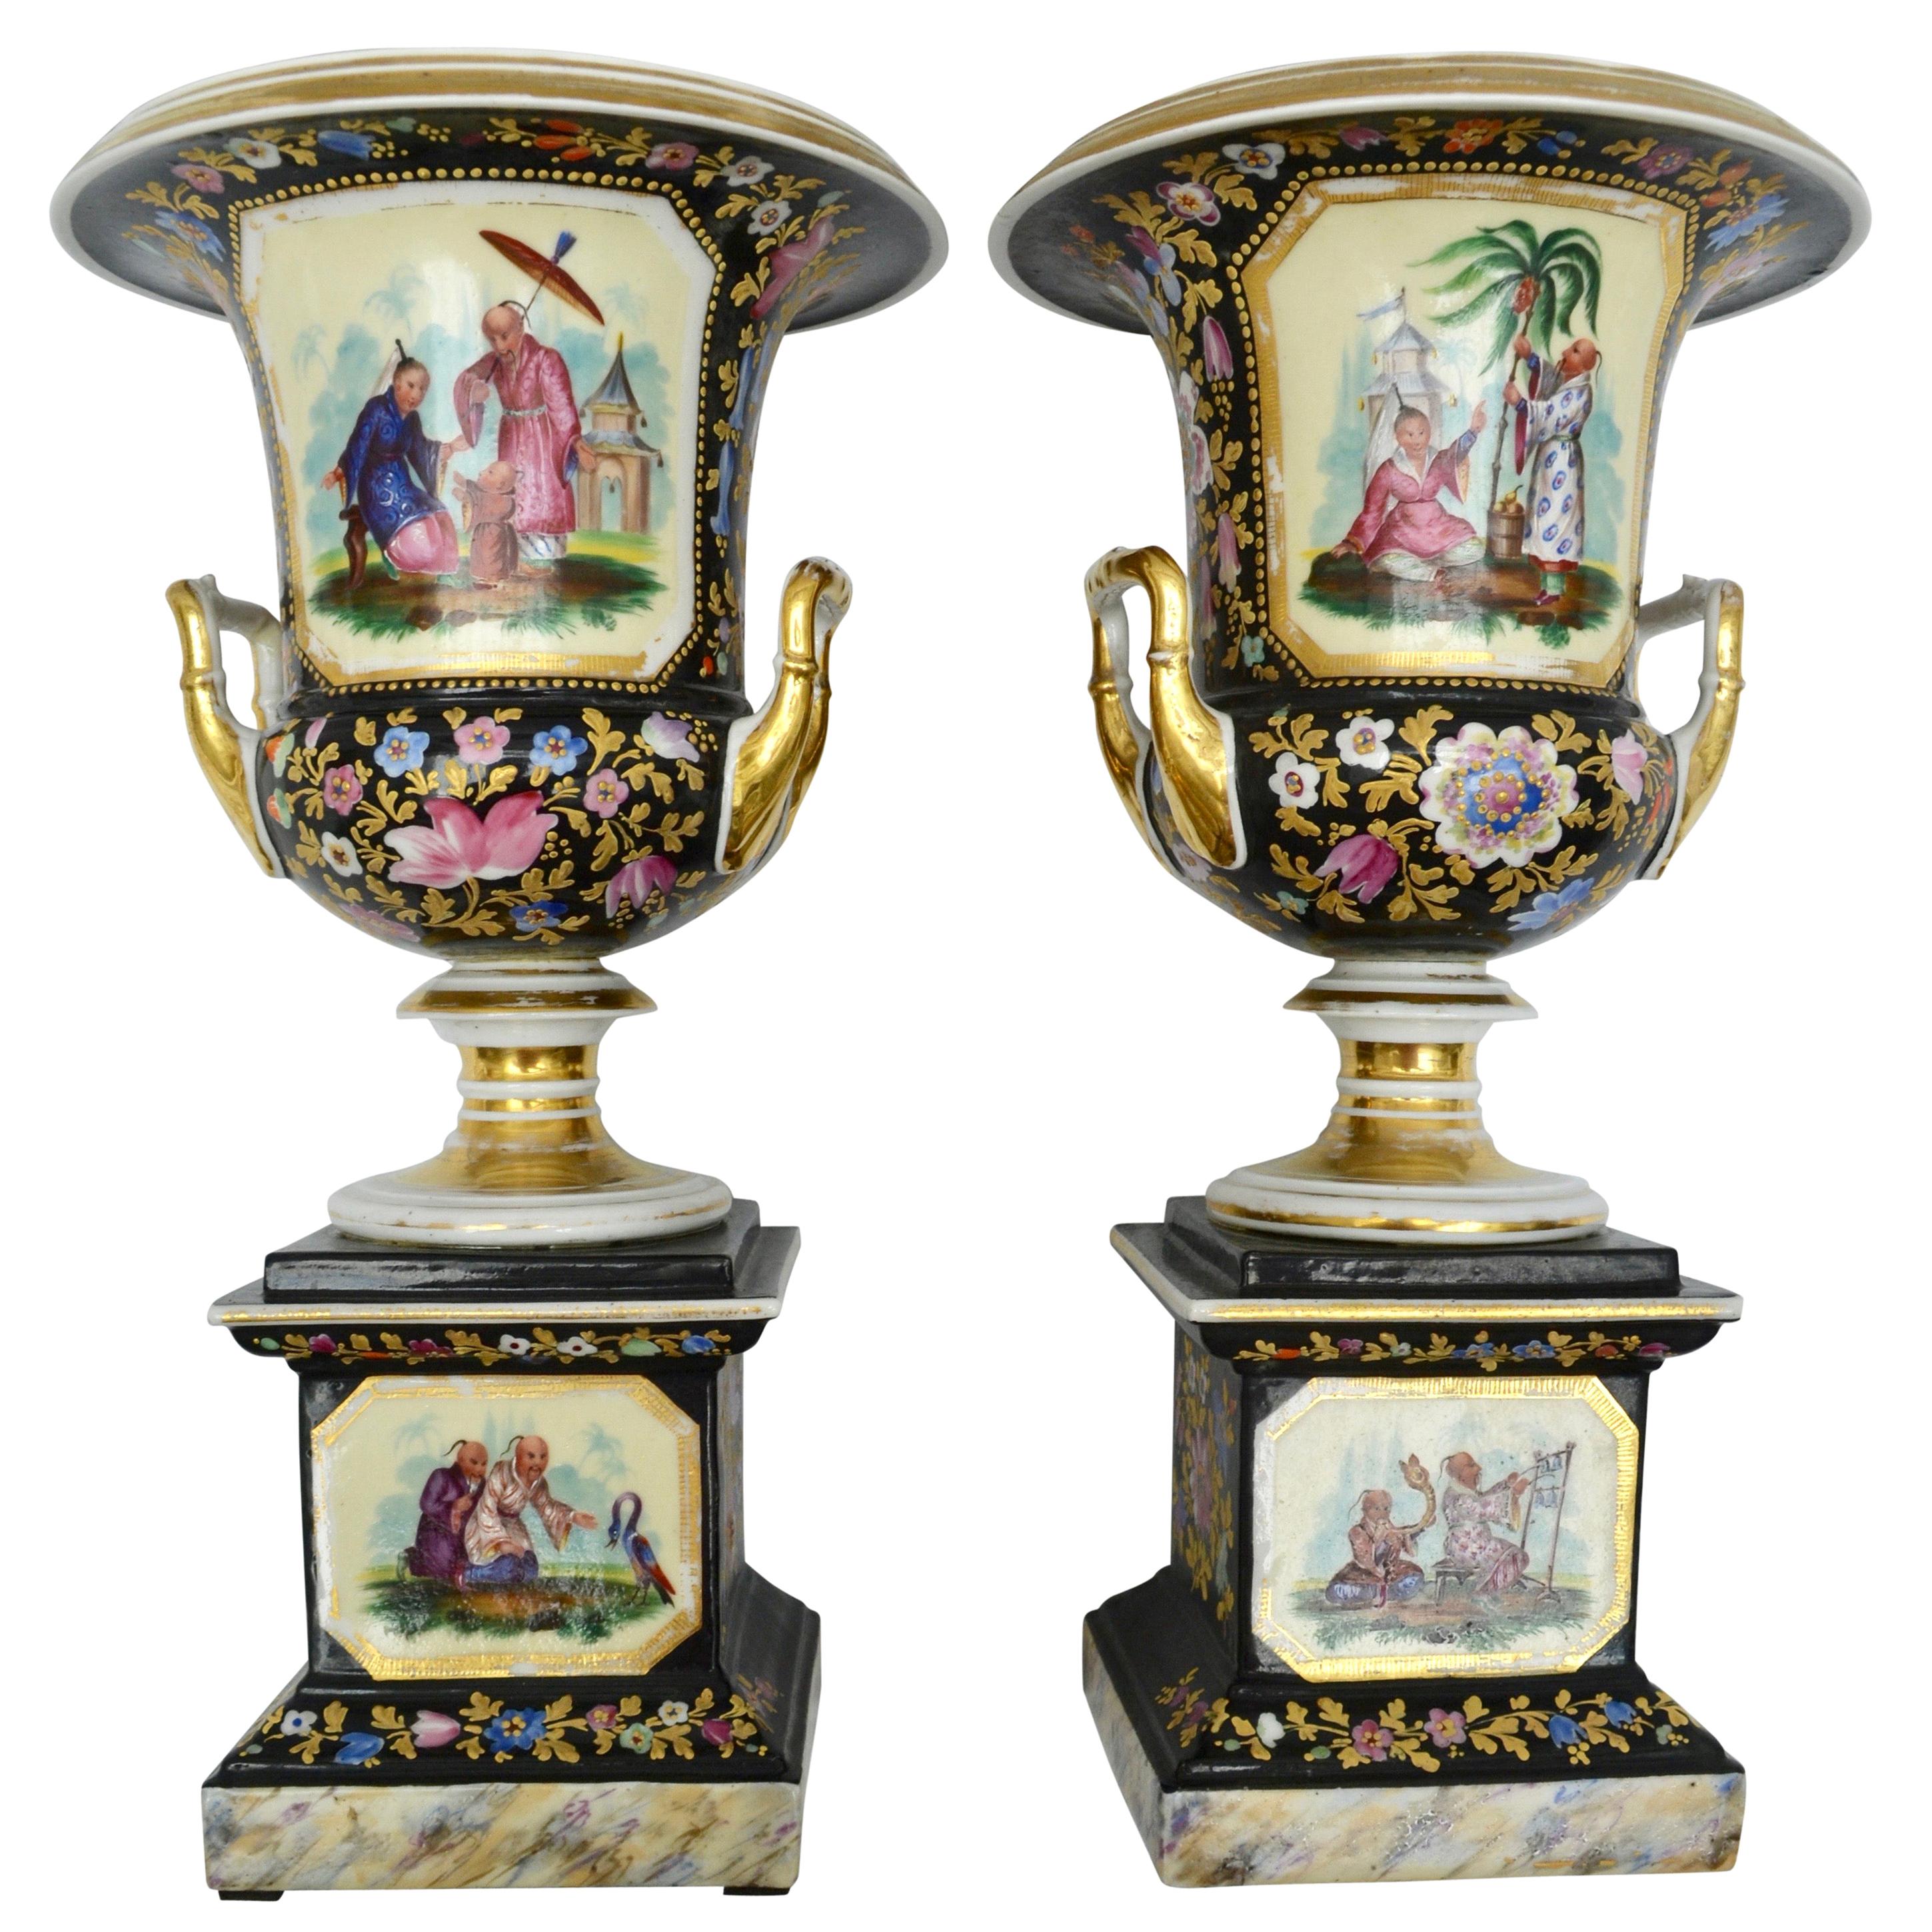 Pair of 19th Century French "Chinoiserie" Porcelain Vases